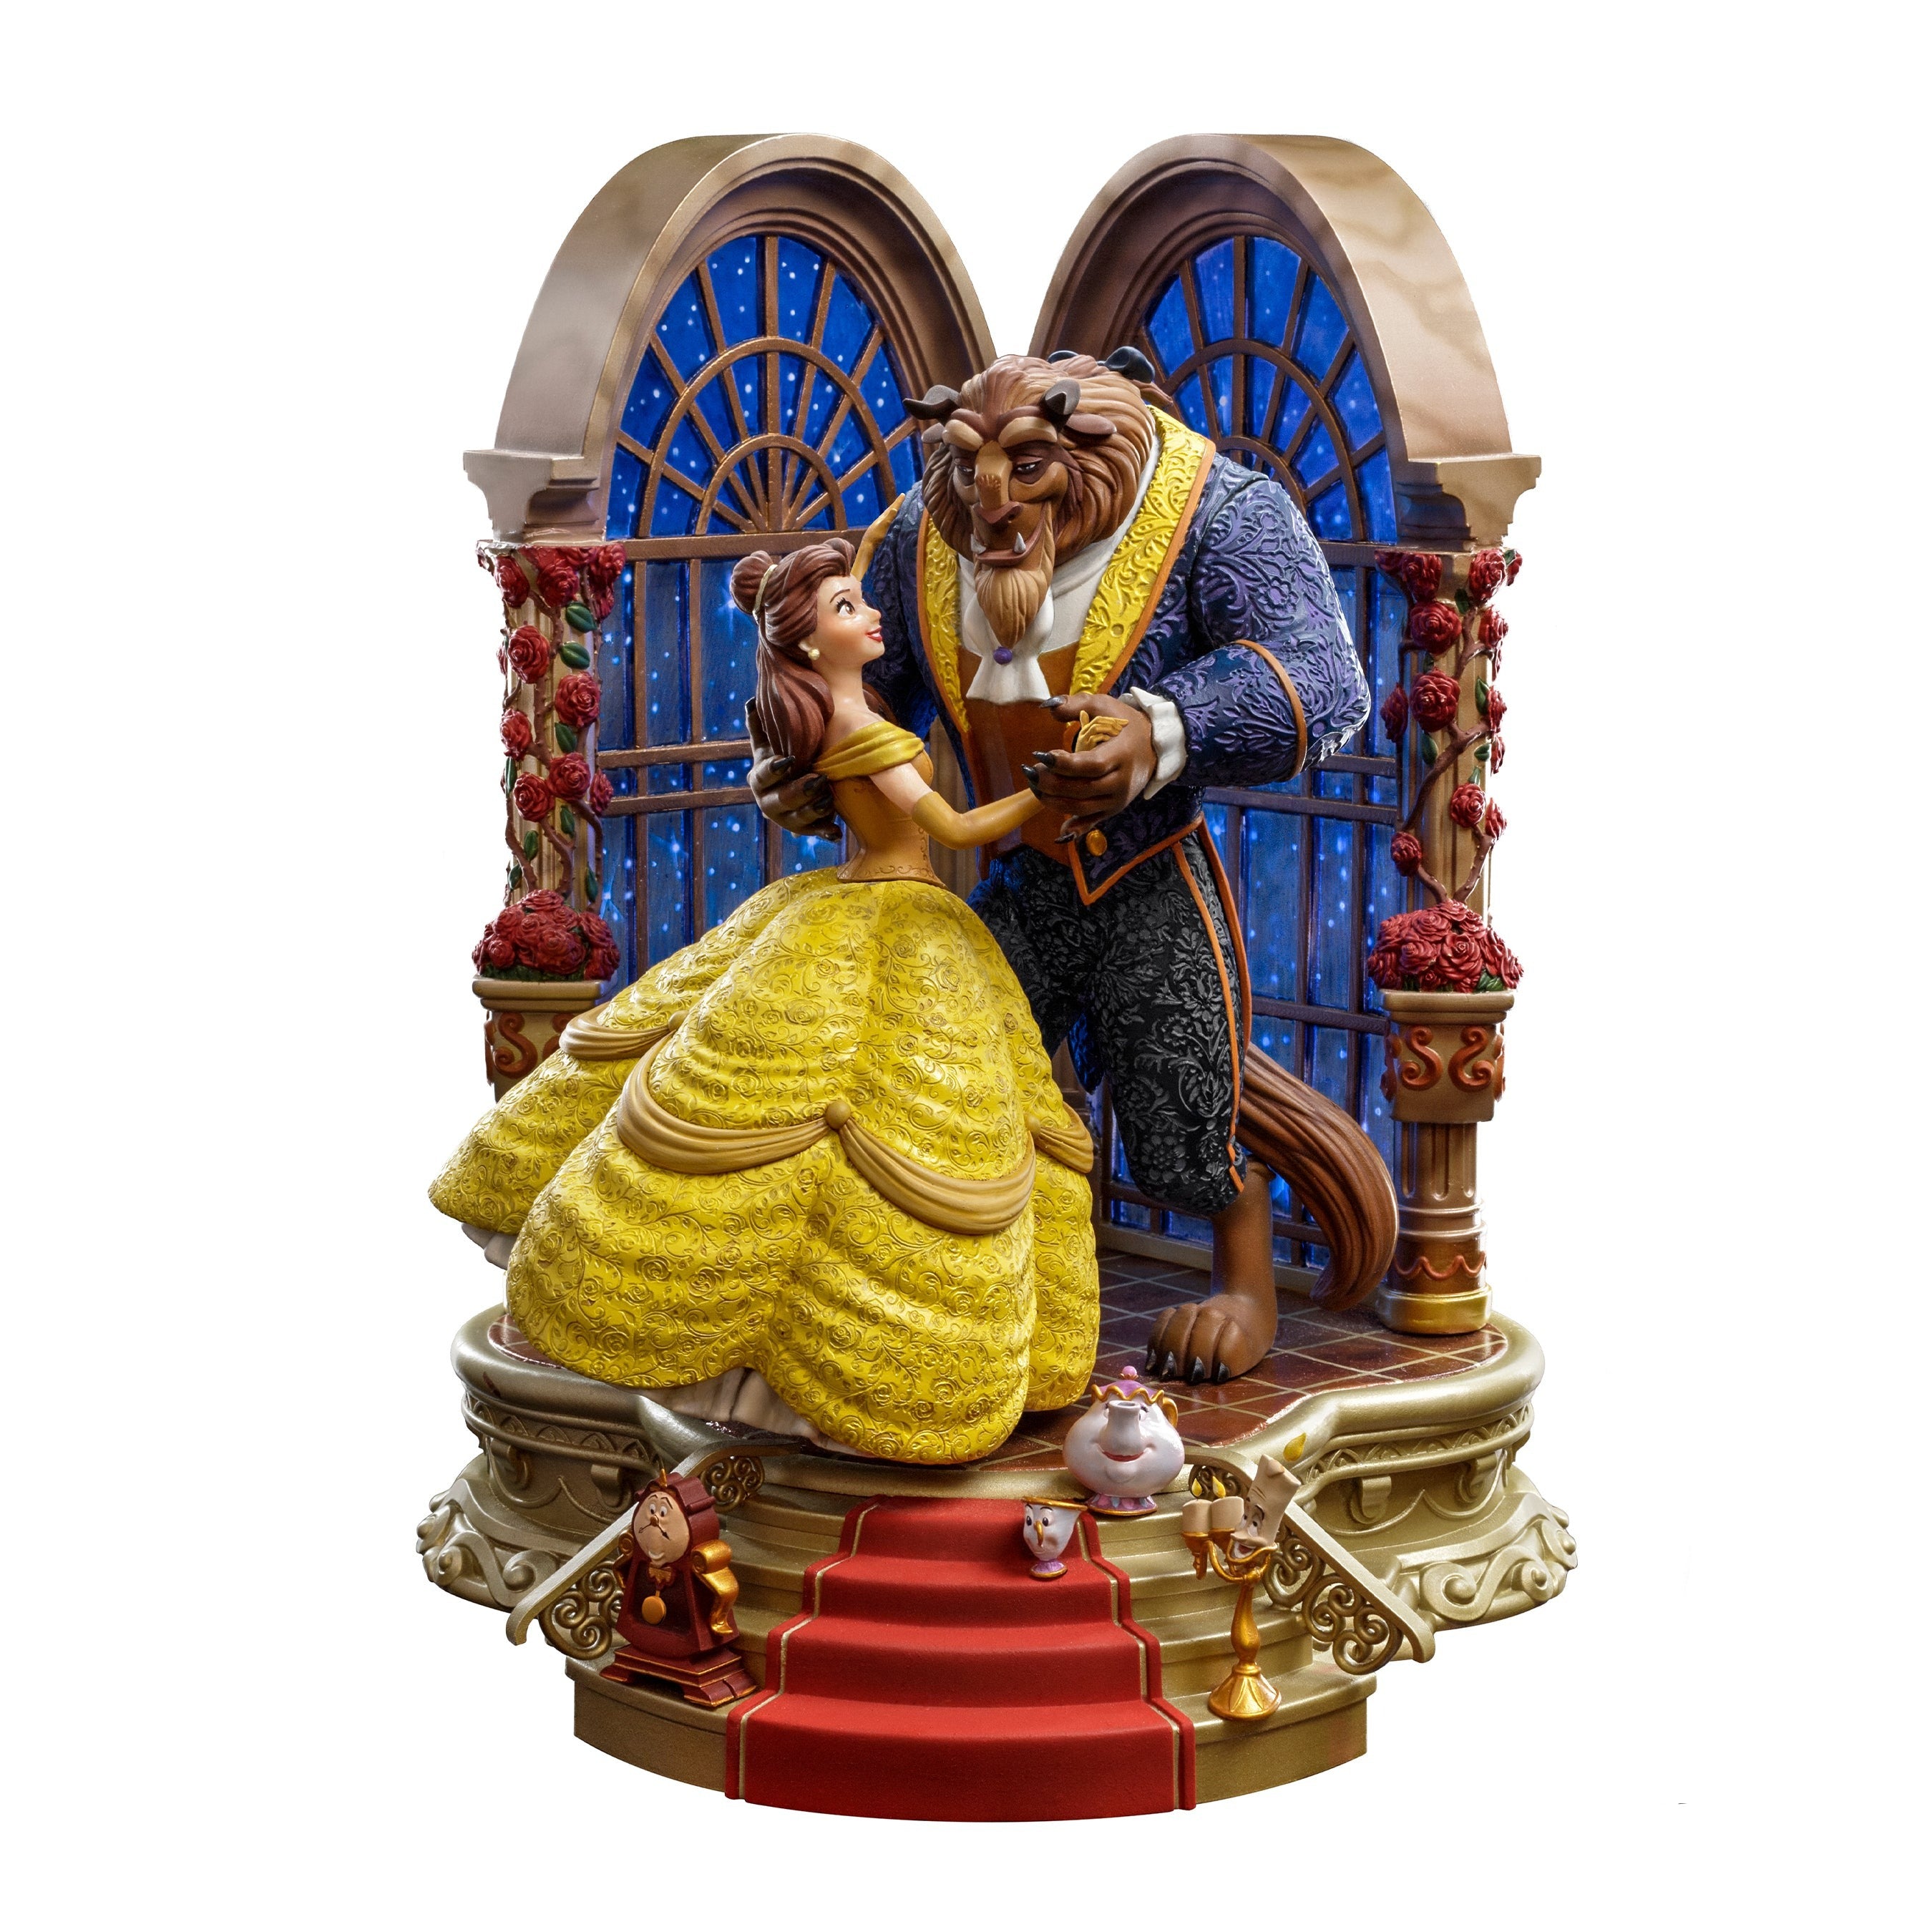 Where to Buy Beauty and the Beast's Clock and Candelabra